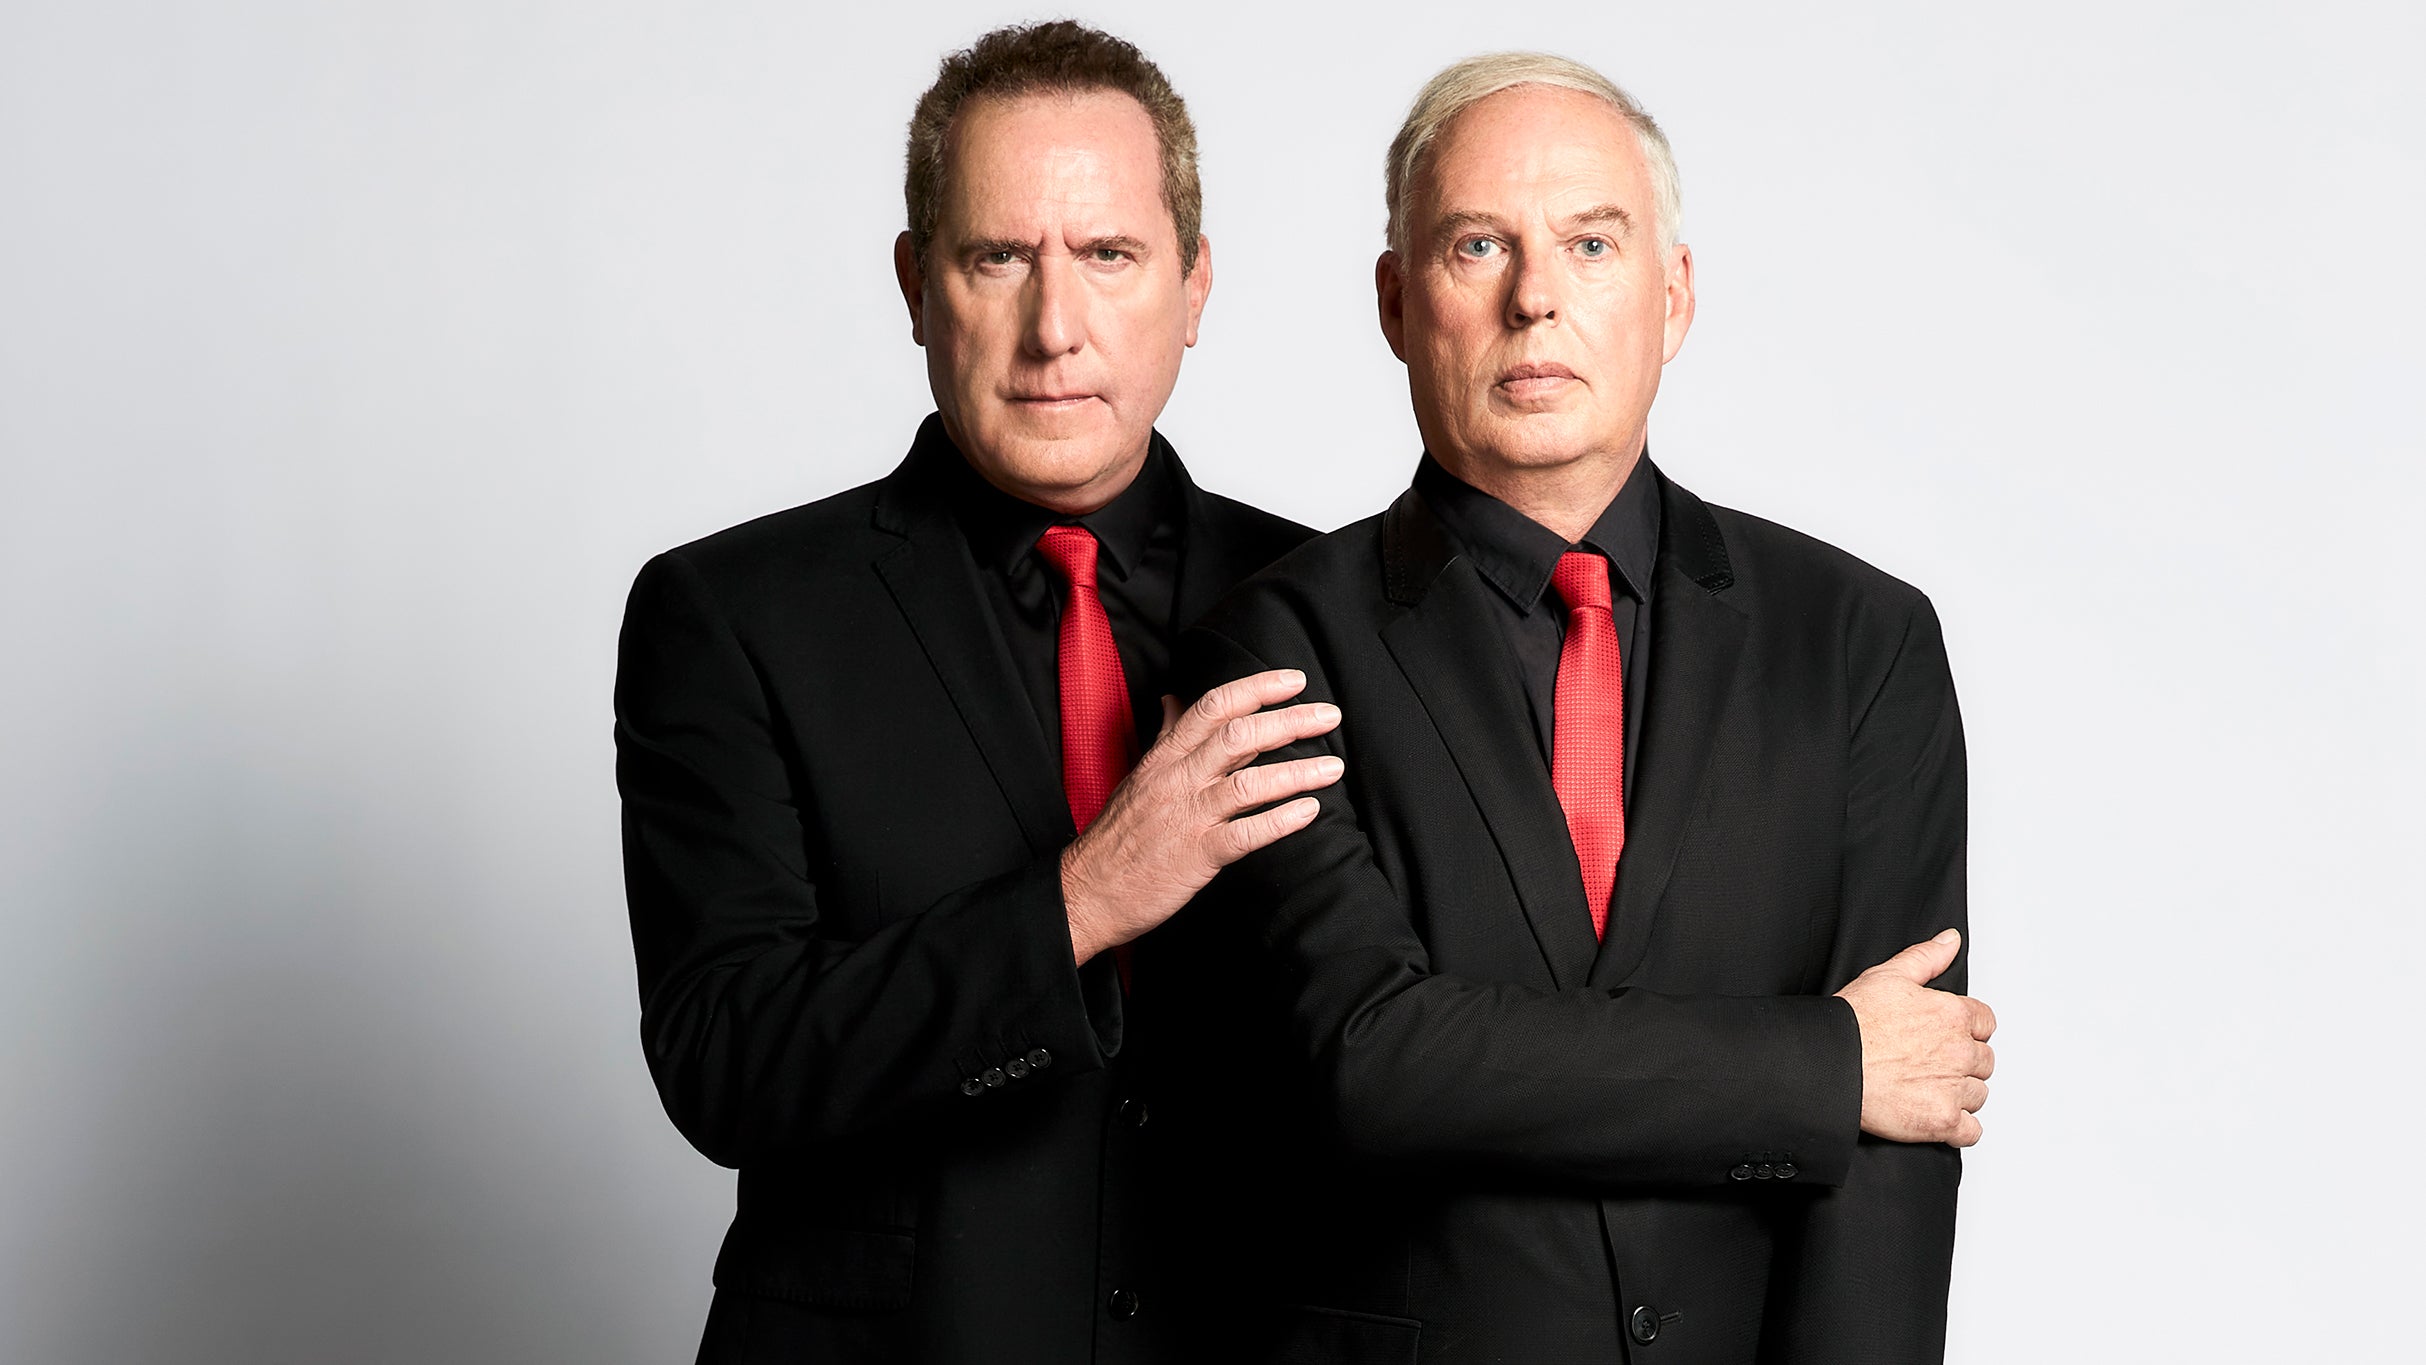 OMD presale code for approved tickets in Washington